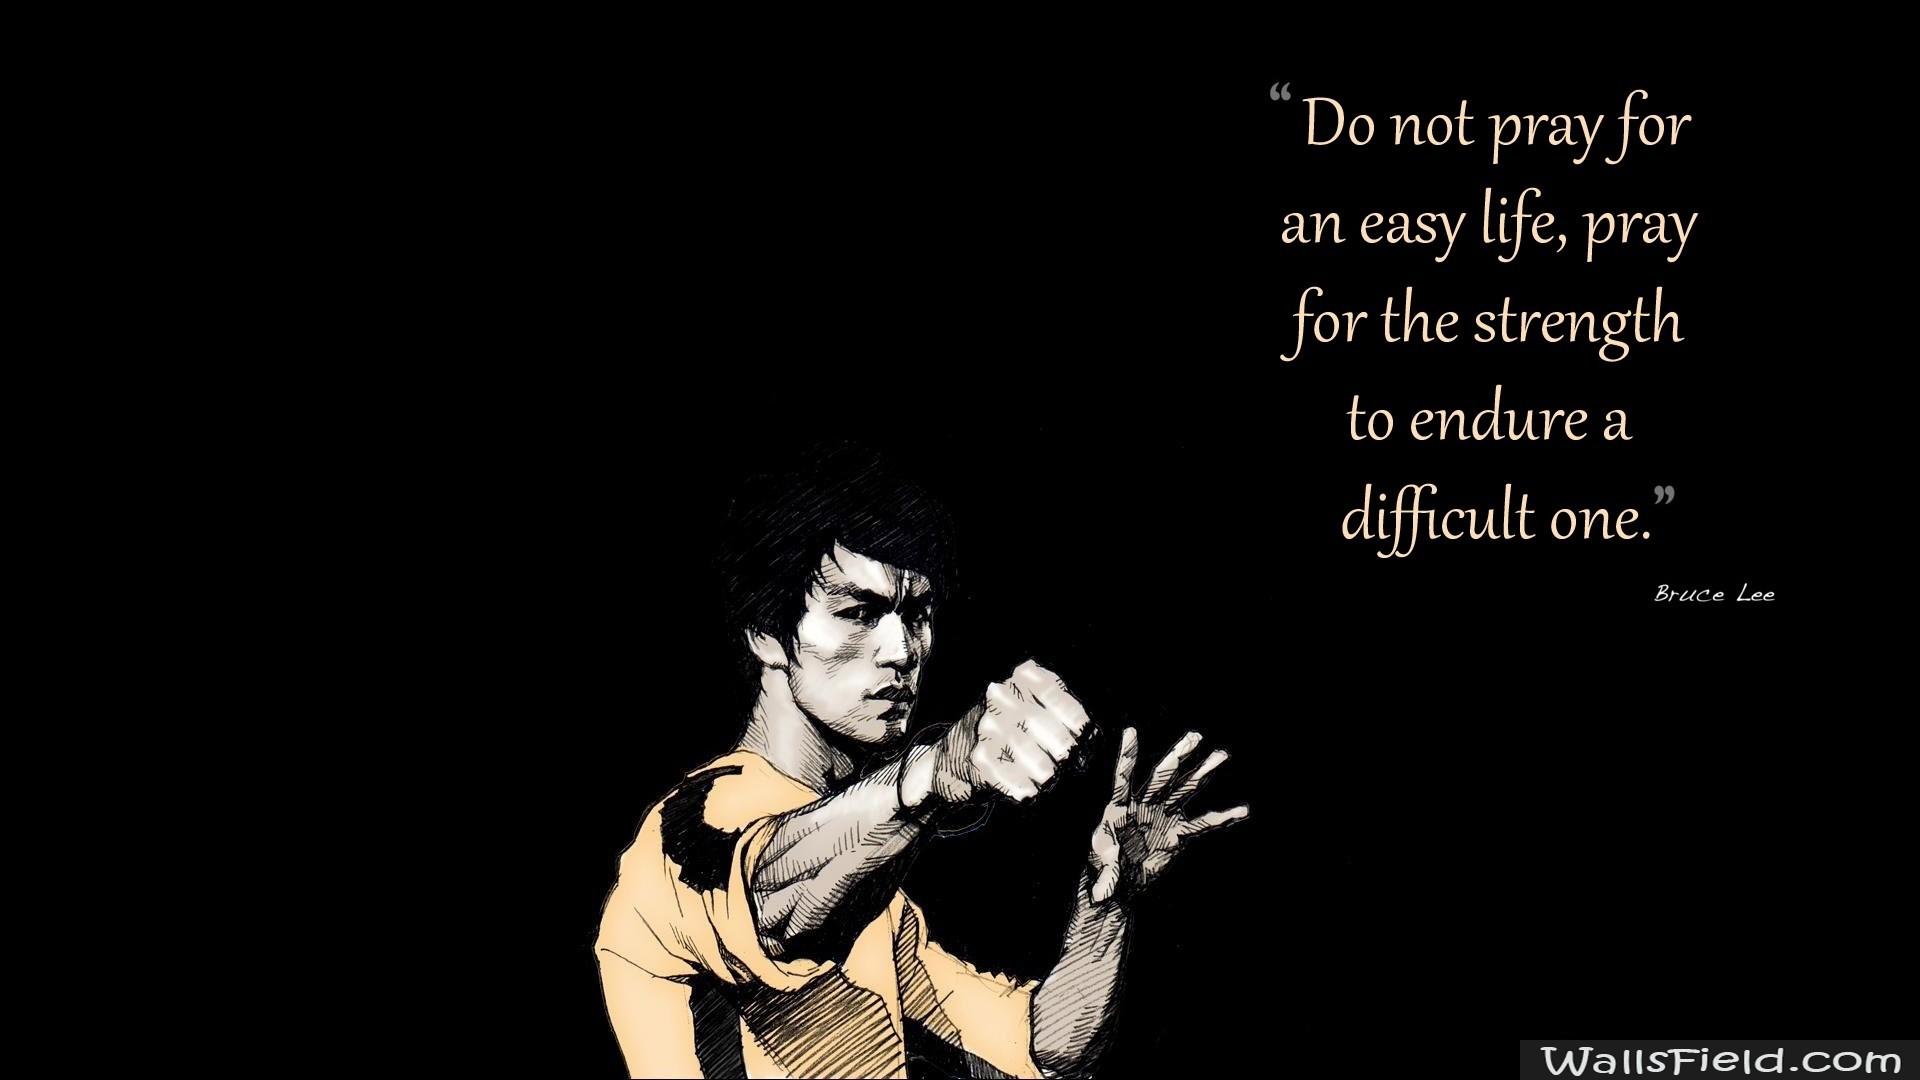 Bruce Lee inspirational quote Typography HD desktop wallpaper, Quote  wallpaper, Bruce Lee wallpaper, Inspiration wallpaper – Typography no.